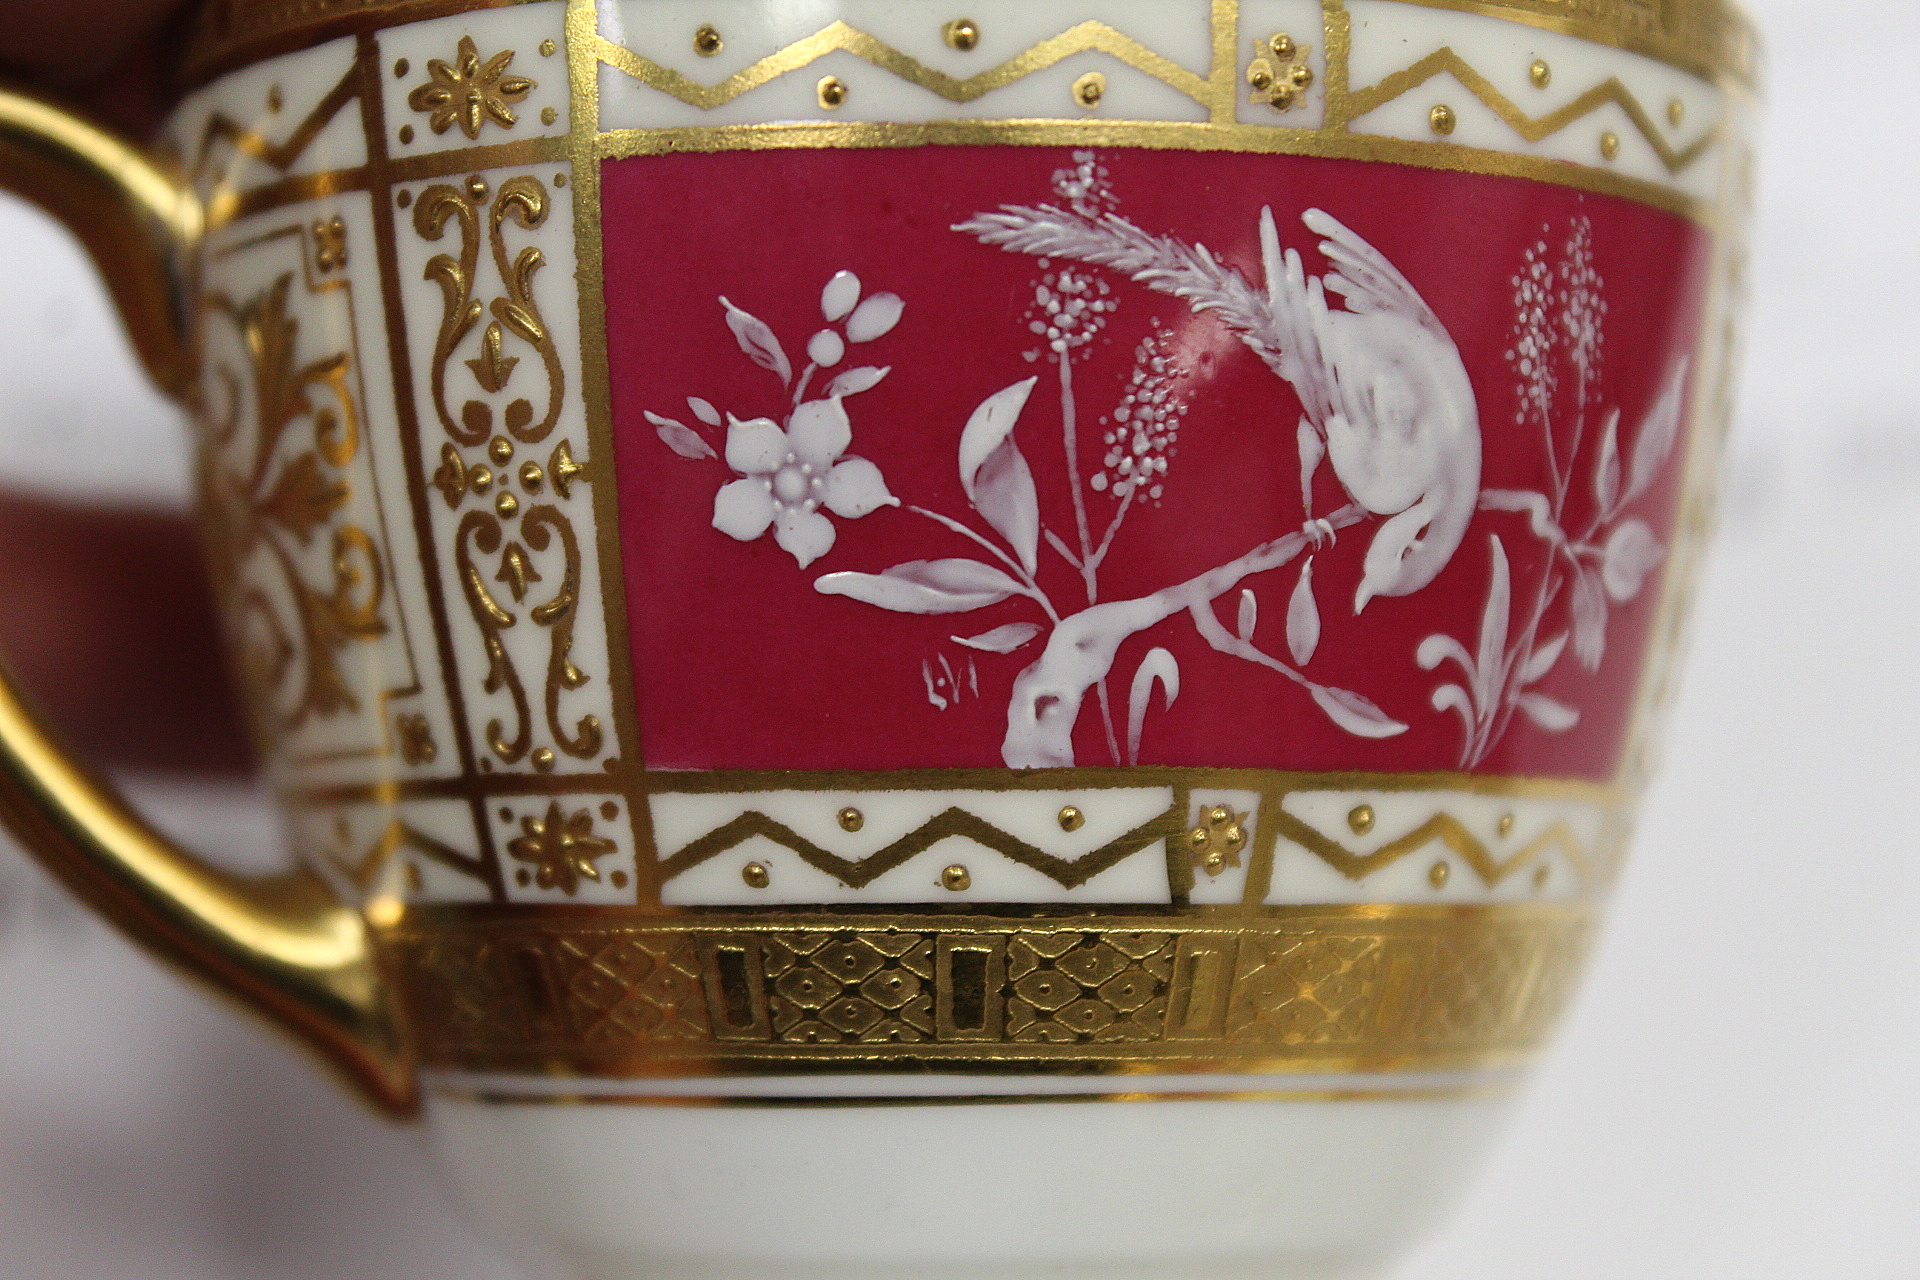 Minton bone china pate sur pate cabinet cup and saucer with cerise and white panels of exotic - Bild 26 aus 26